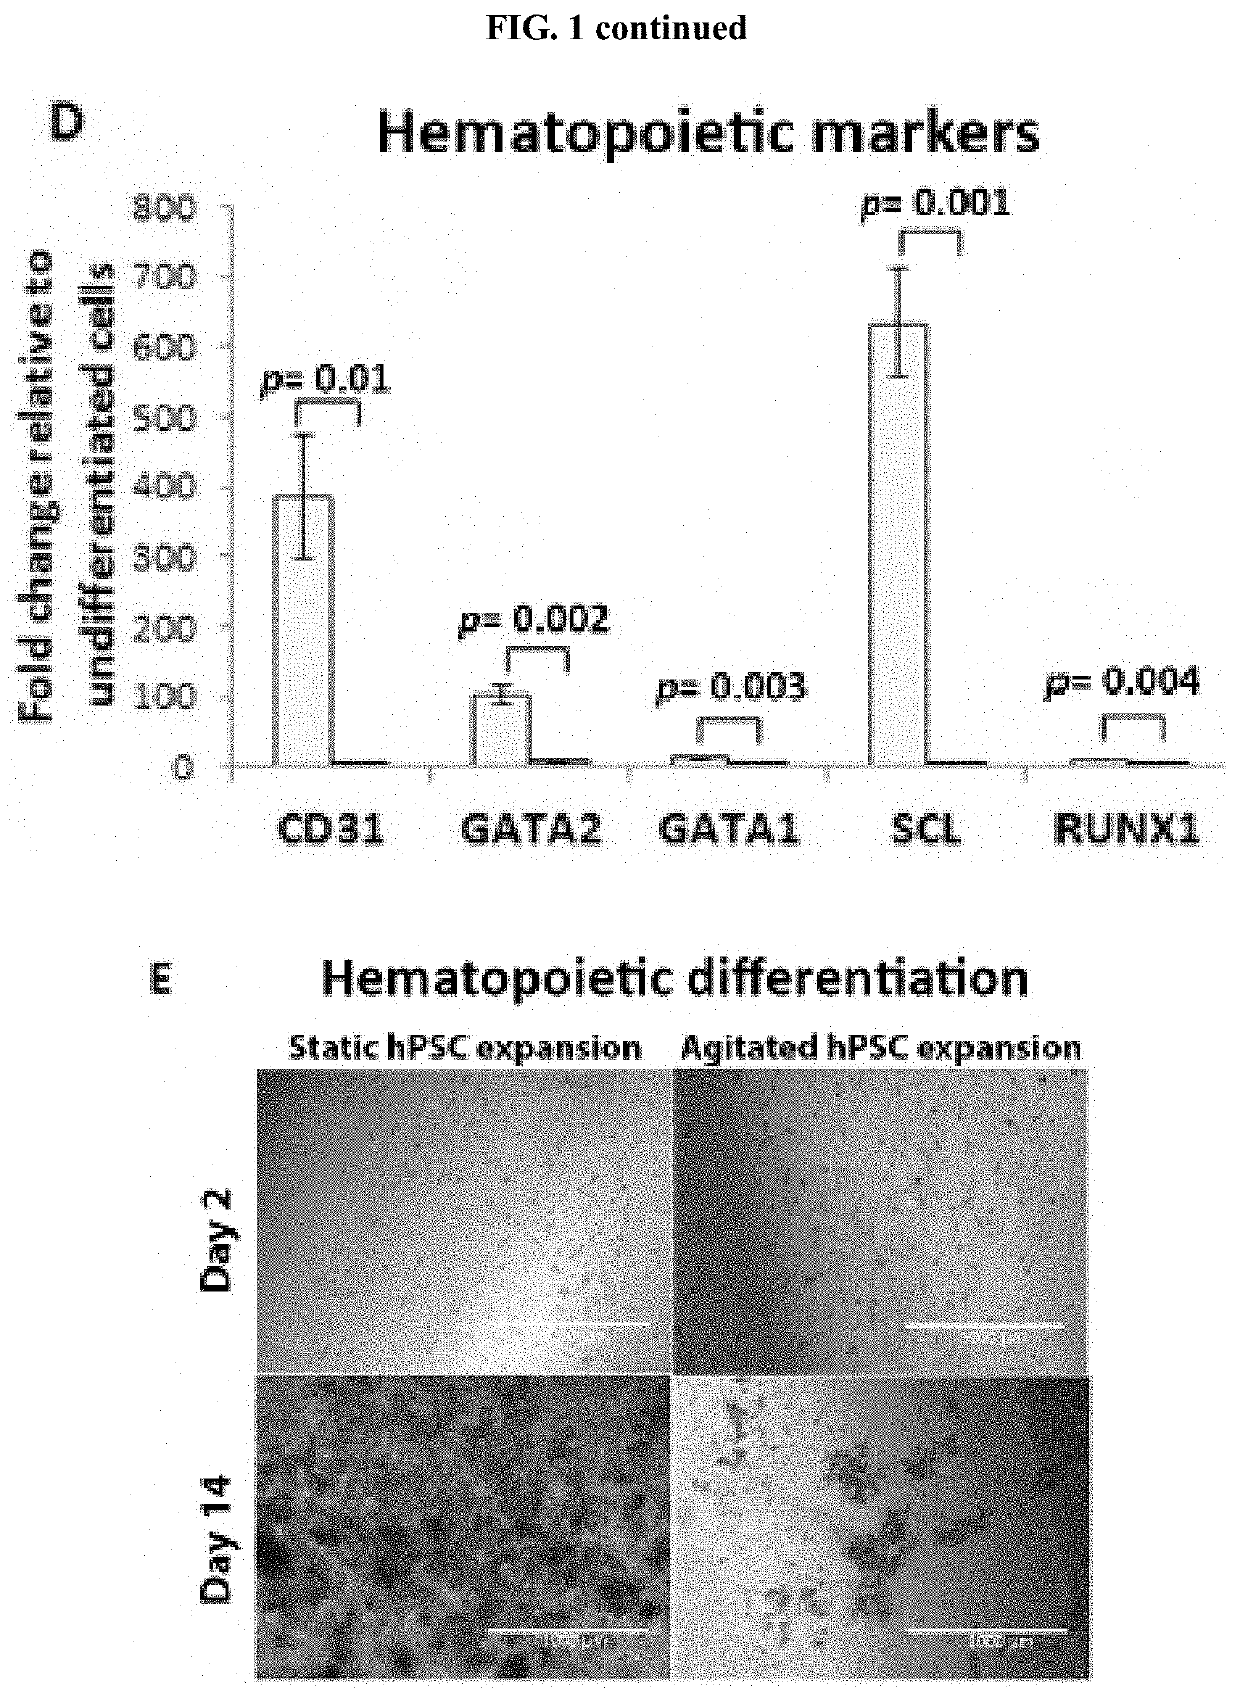 Method for Differentiation of Human Pluripotent Stem Cell Lines in Suspension Culture